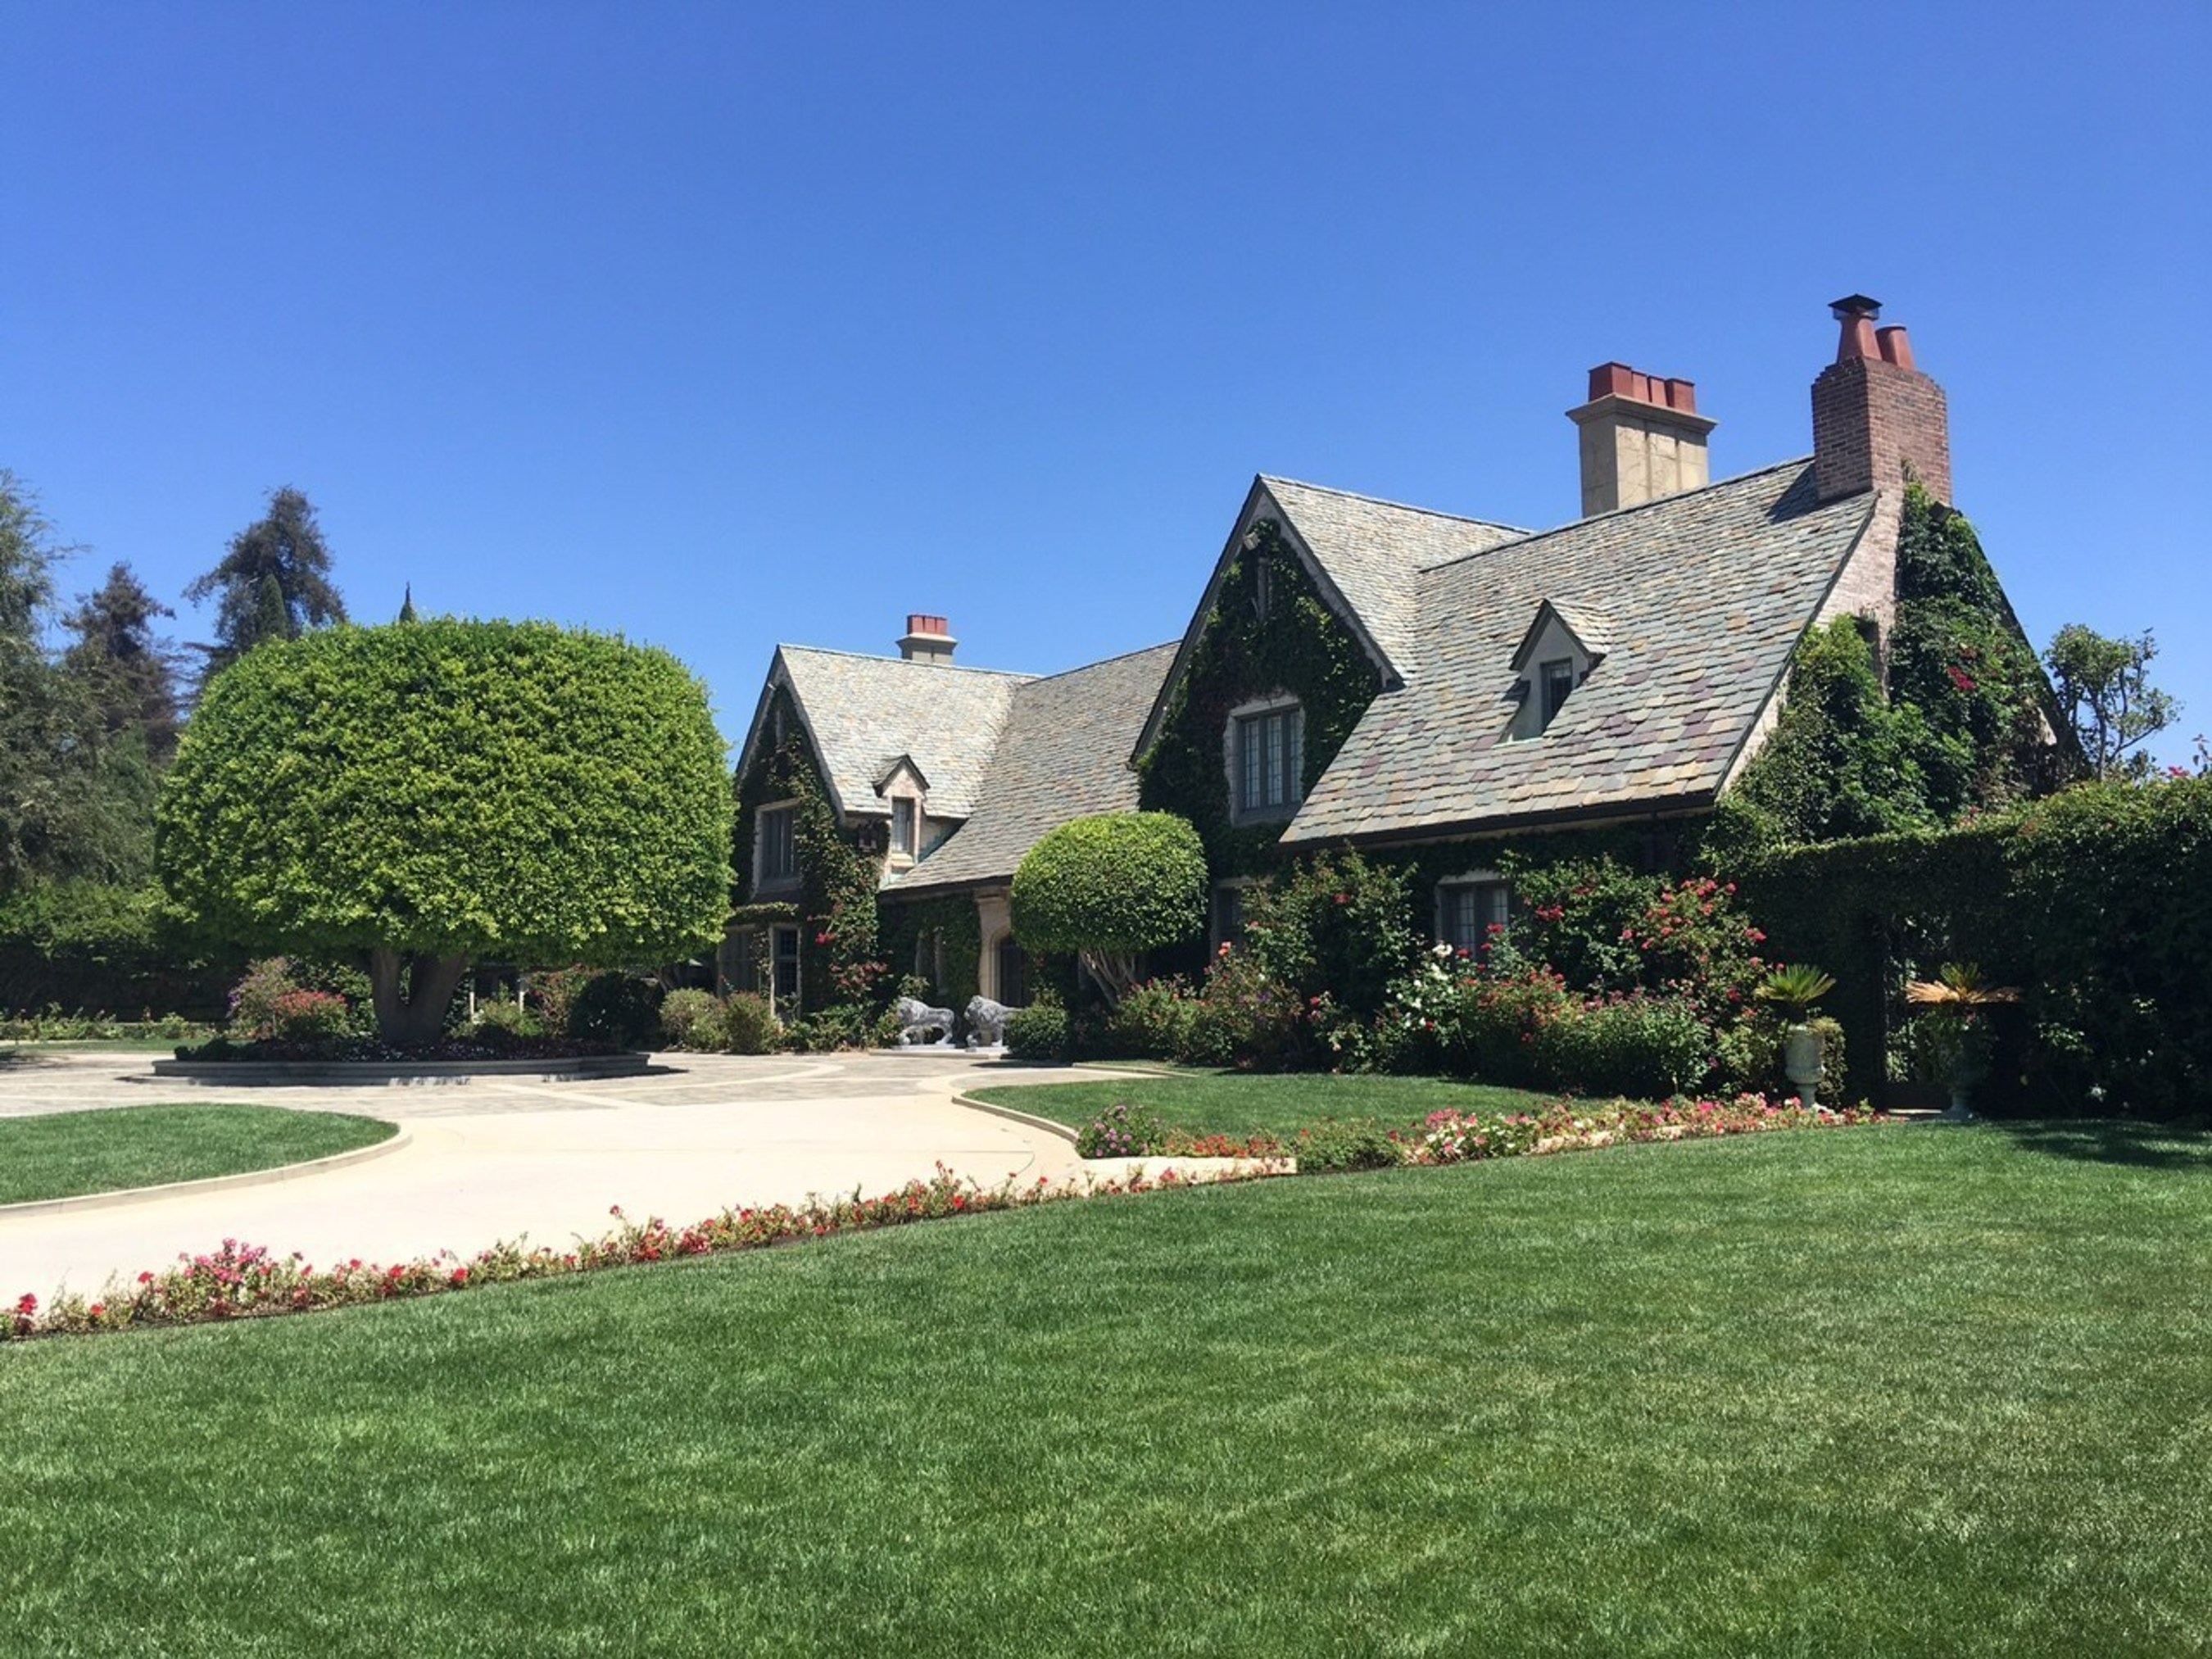 The Playboy Mansion sister house, home of Daren Metropoulos since 2009. He purchased the Playboy Mansion in August of 2016 and intends to eventually reconnect the two estates on the 7.3 acre compound.